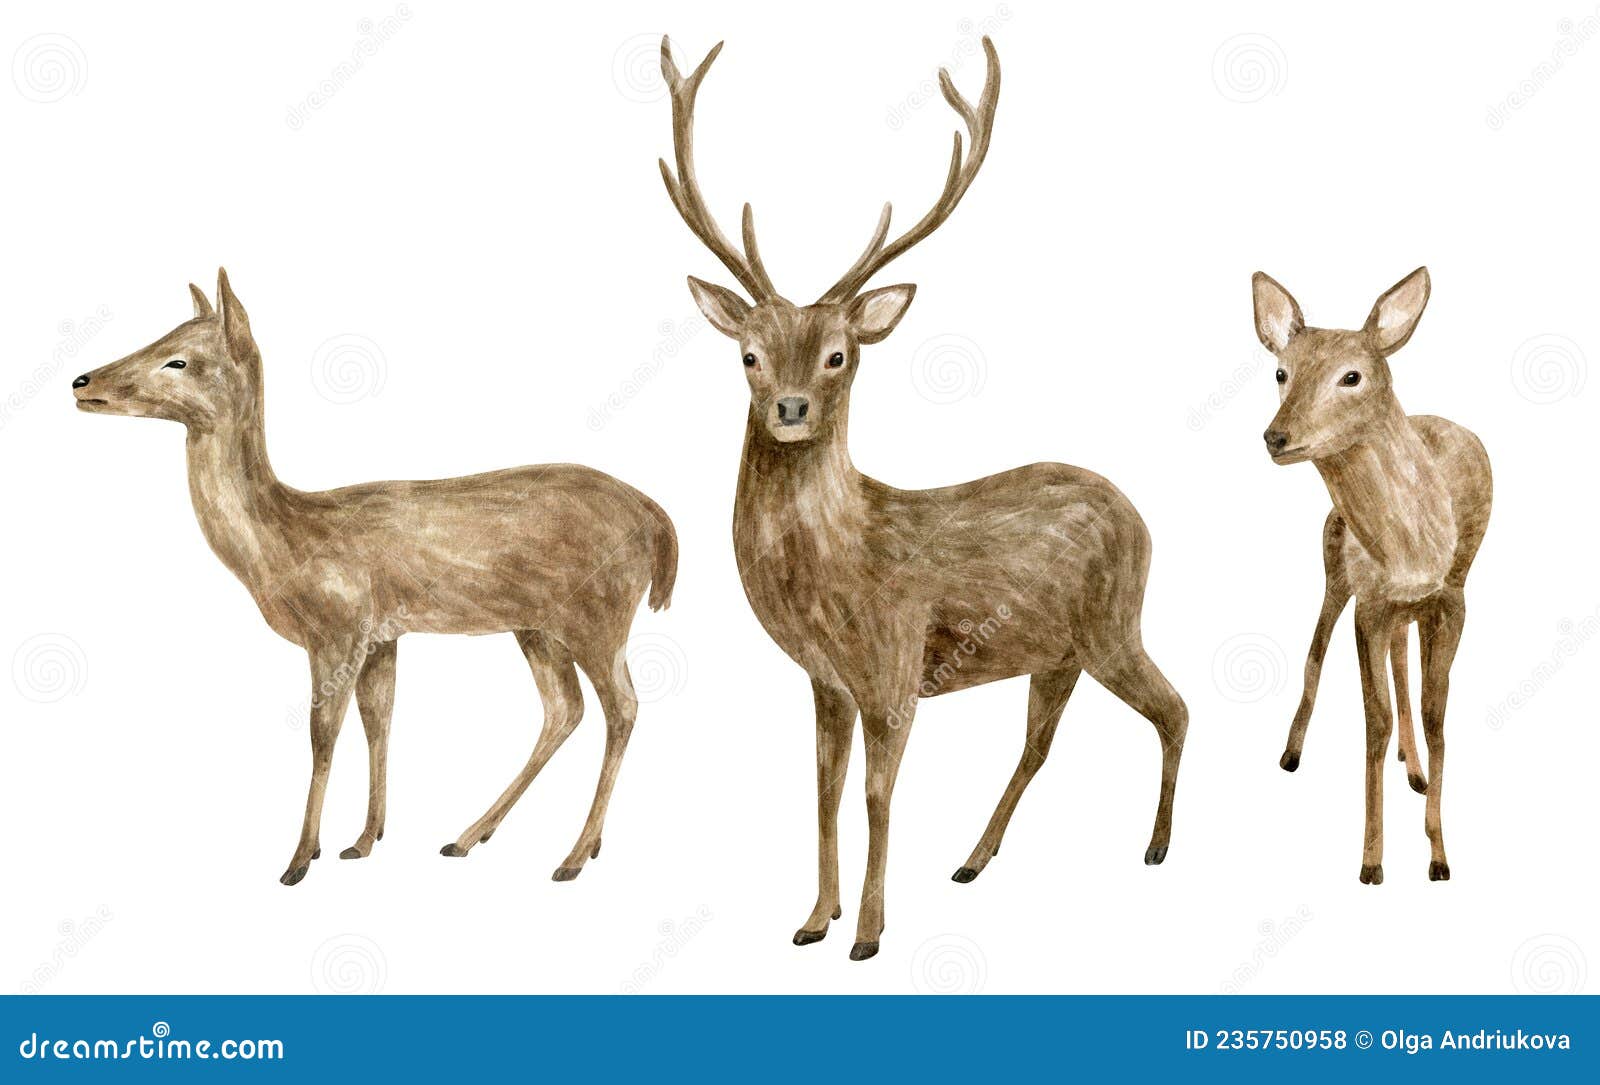 How To Draw Animals Deer 3